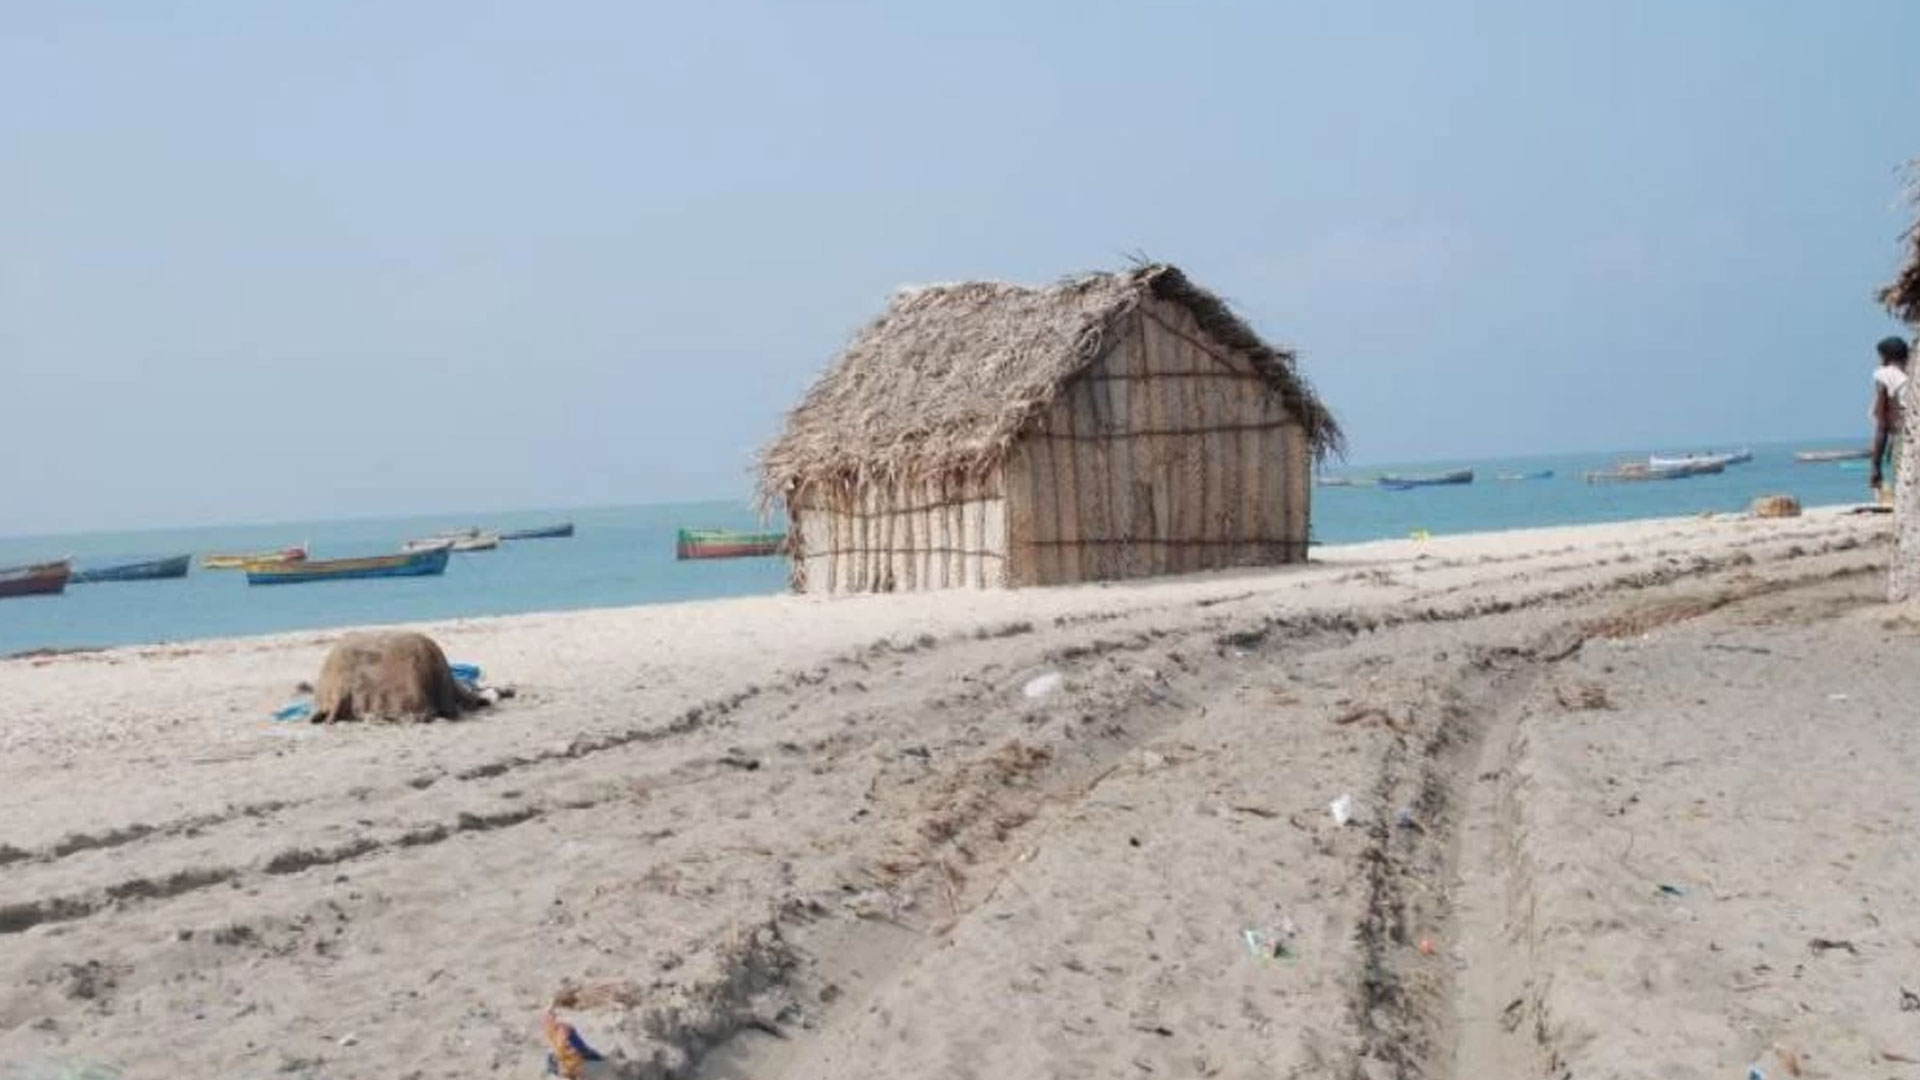 Believe-it-or-not-this-is-the-last-land-of-India,-Dhanushkodi